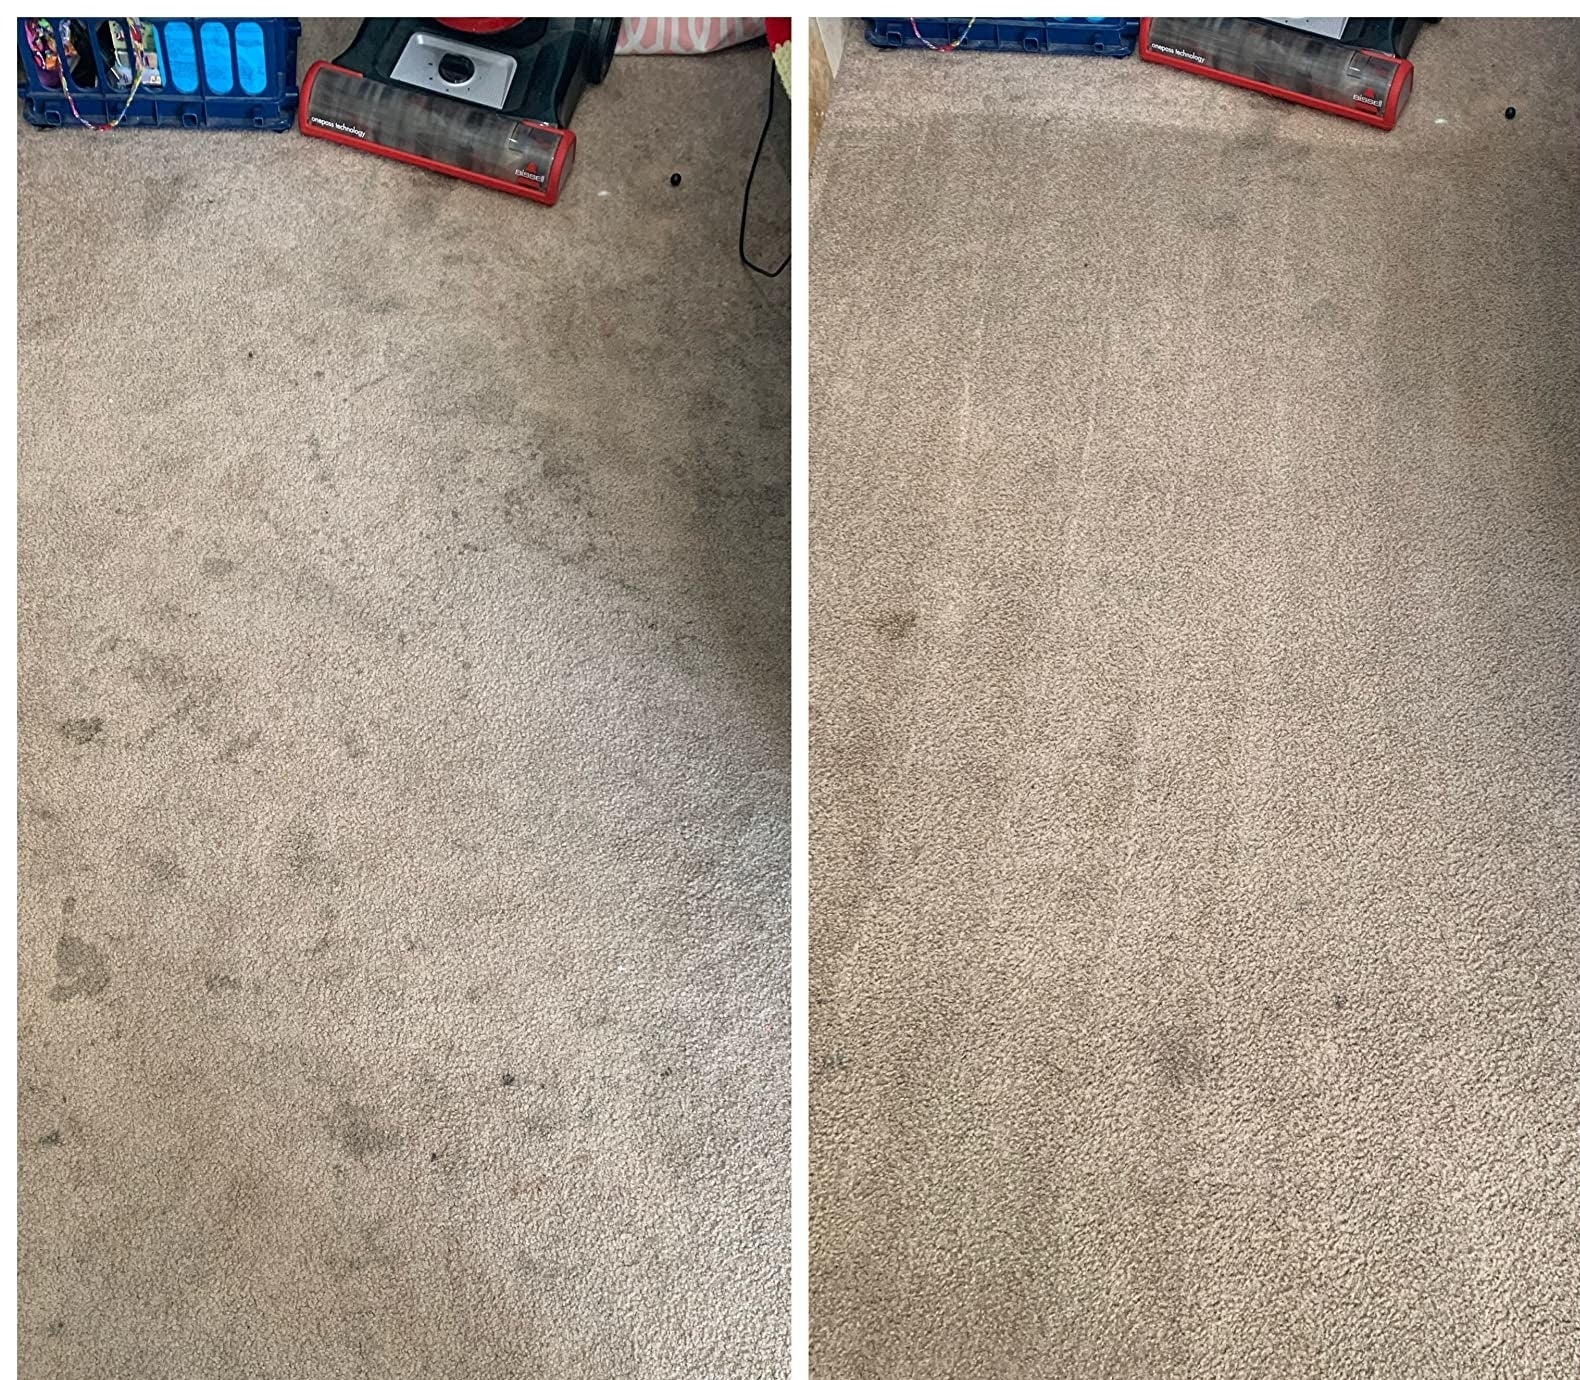 Reviewer&#x27;s before image of stained carpet and then after image of clean carpet using the solution